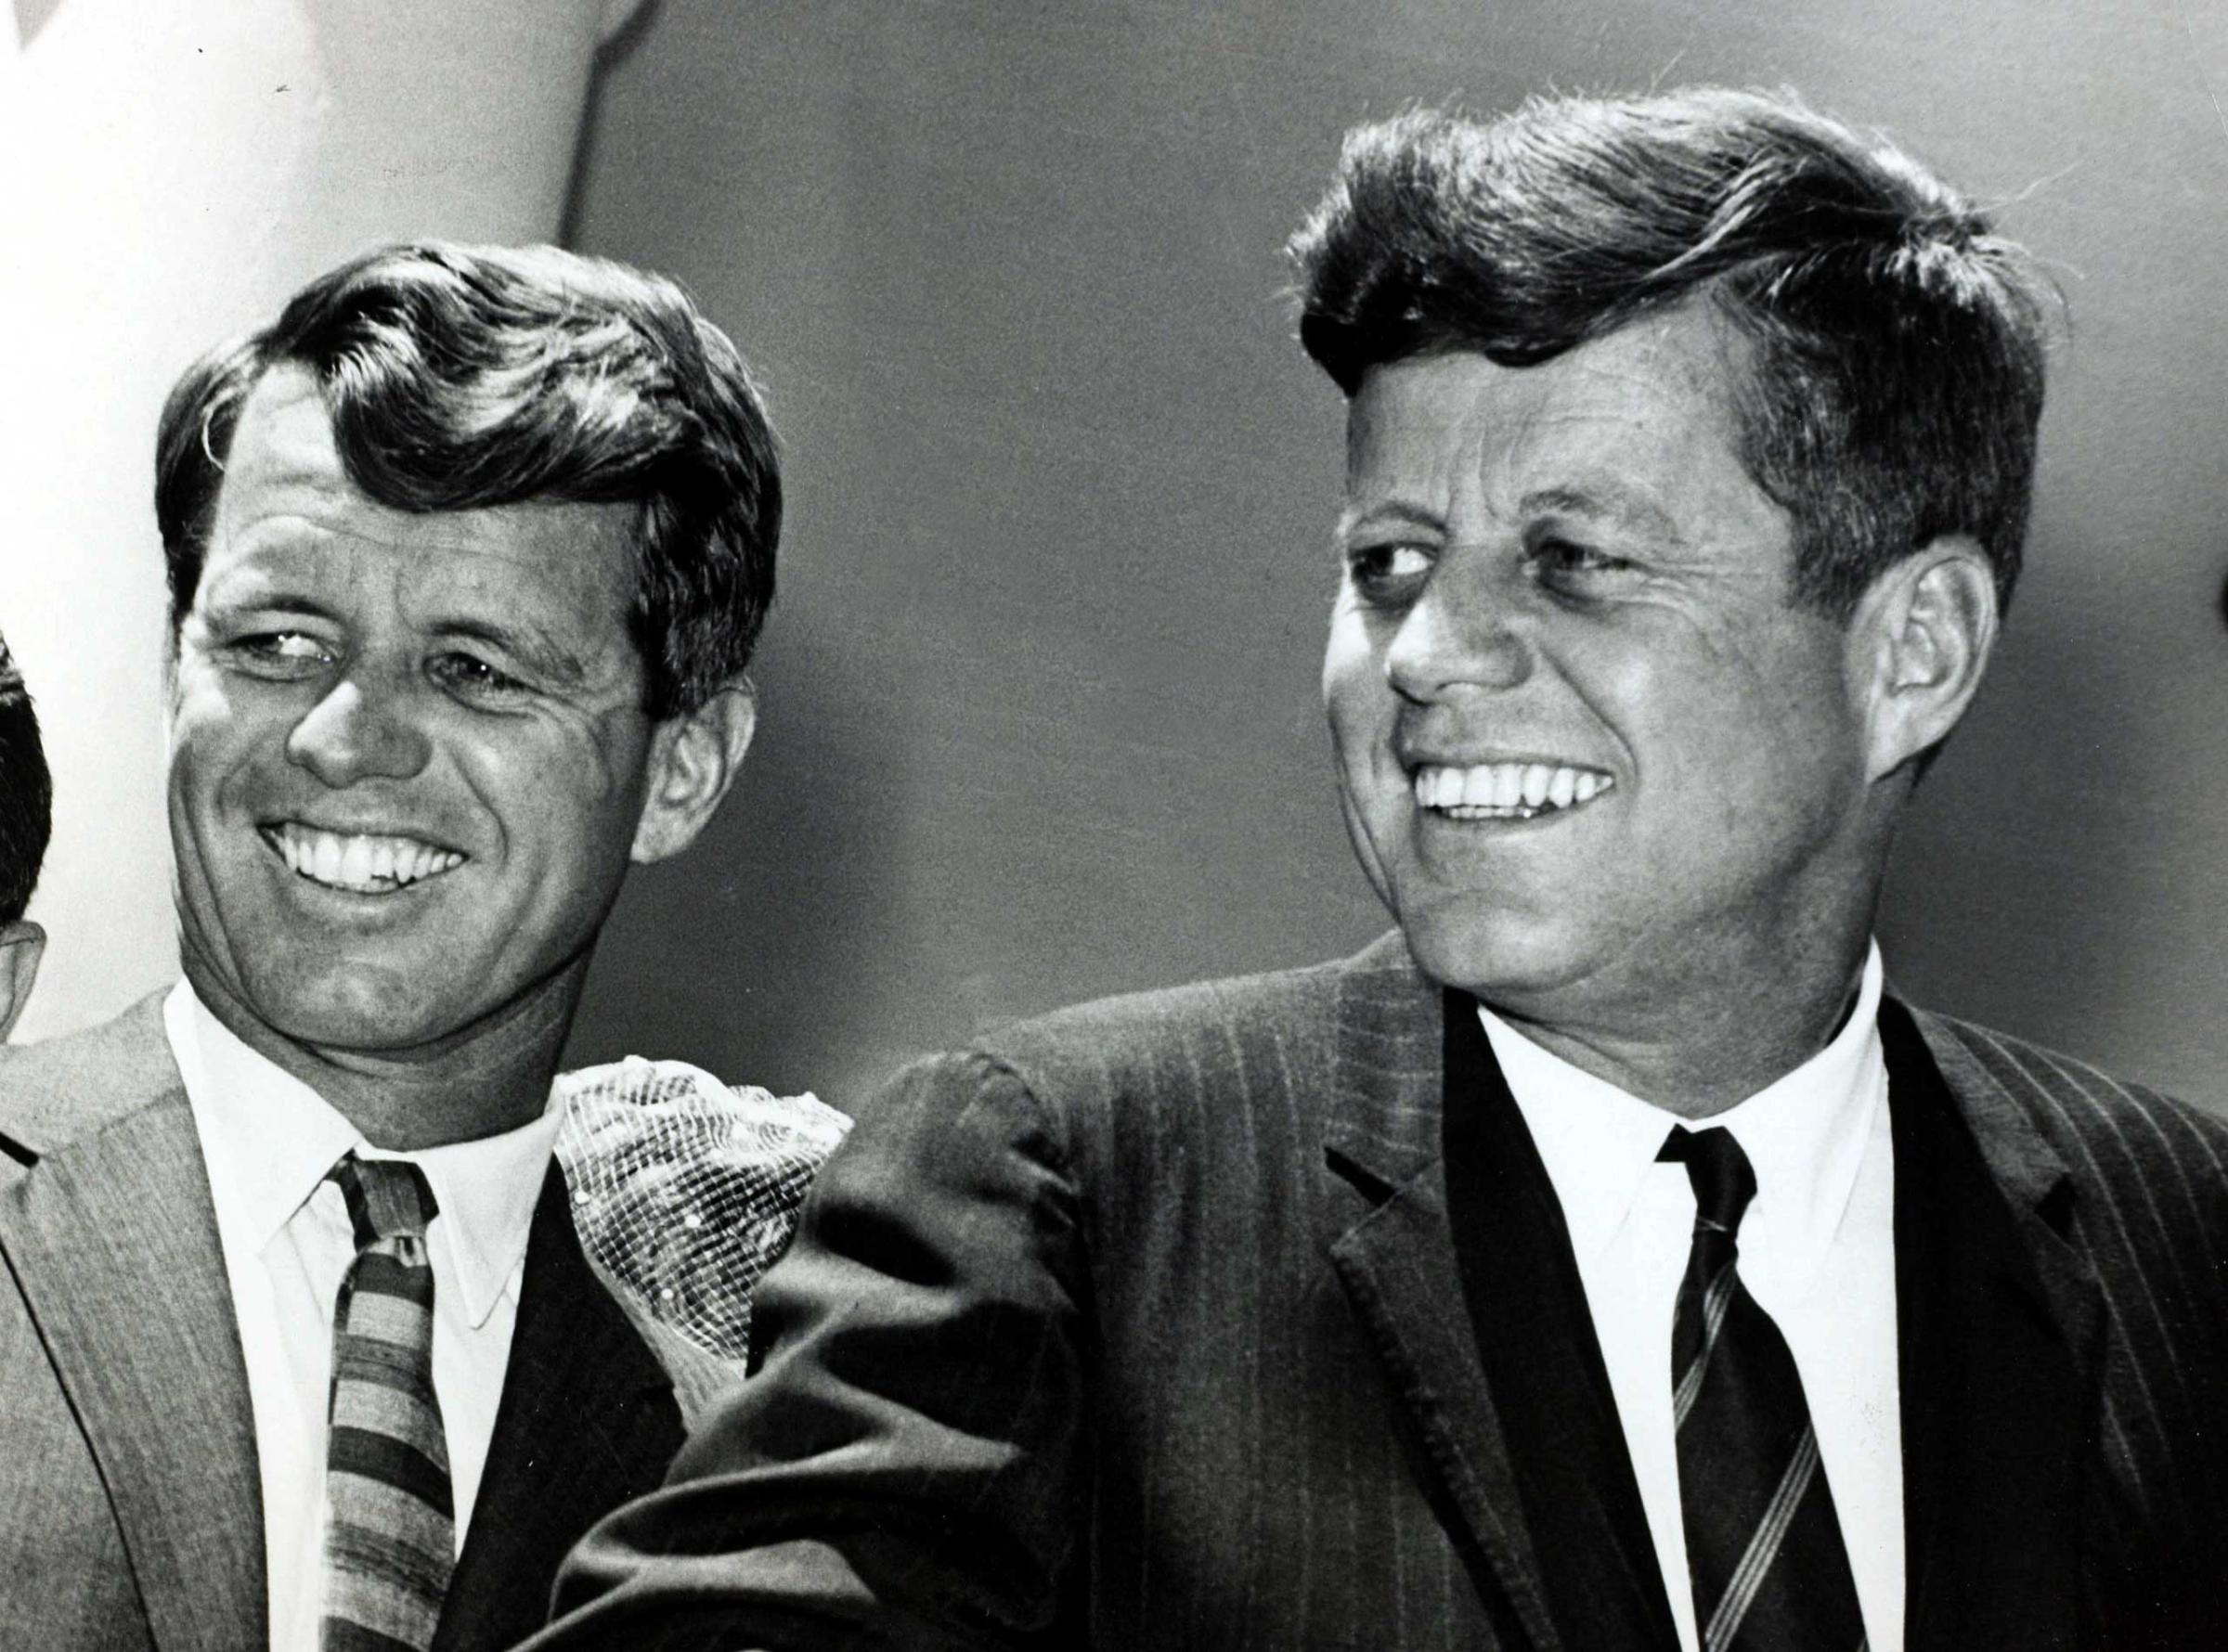 Politics Personalities. USA. pic: May 1963. Washington D.C. President John F. Kennedy, right with his brother the Attorney General Robert Kennedy. John F. Kennedy (1917-1963) became the 35th President of the United States serving 1961-1963.